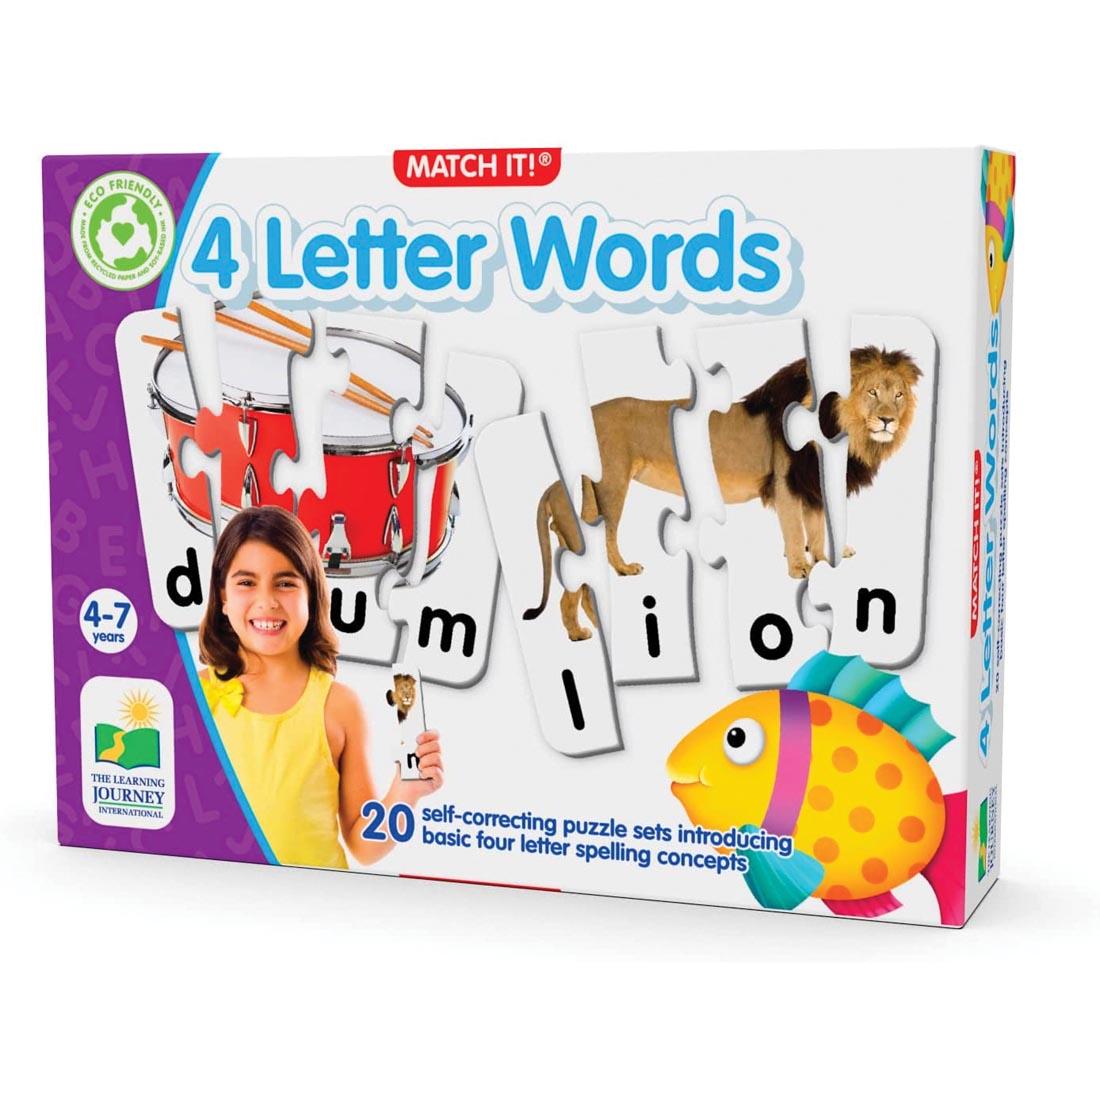 Match It! 4 Letter Words By The Learning Journey